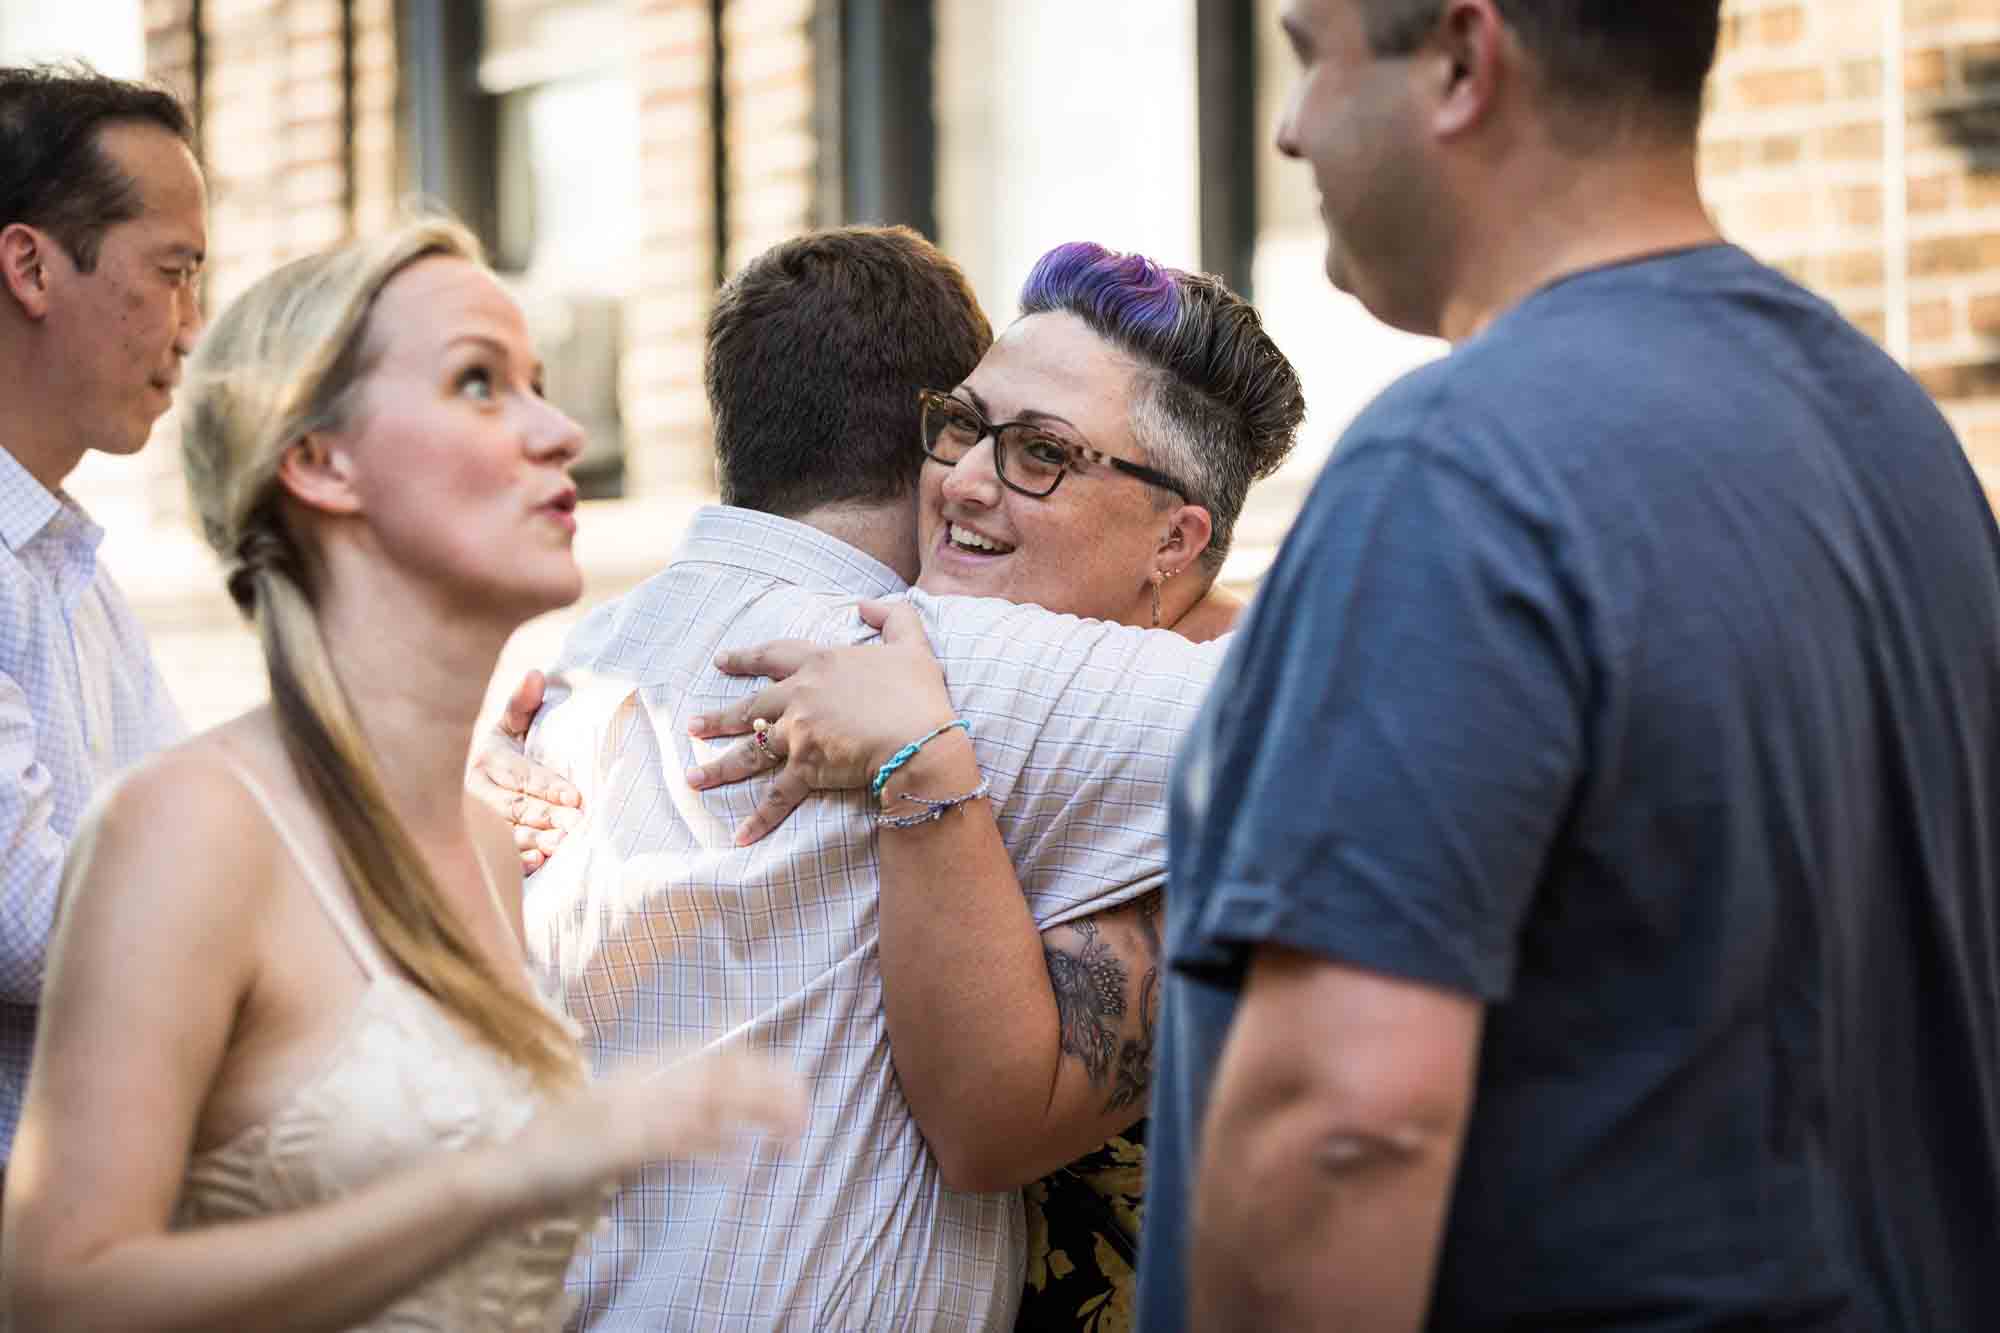 Guests hugging on the sidewalk during rehearsal dinner at an outdoor restaurant